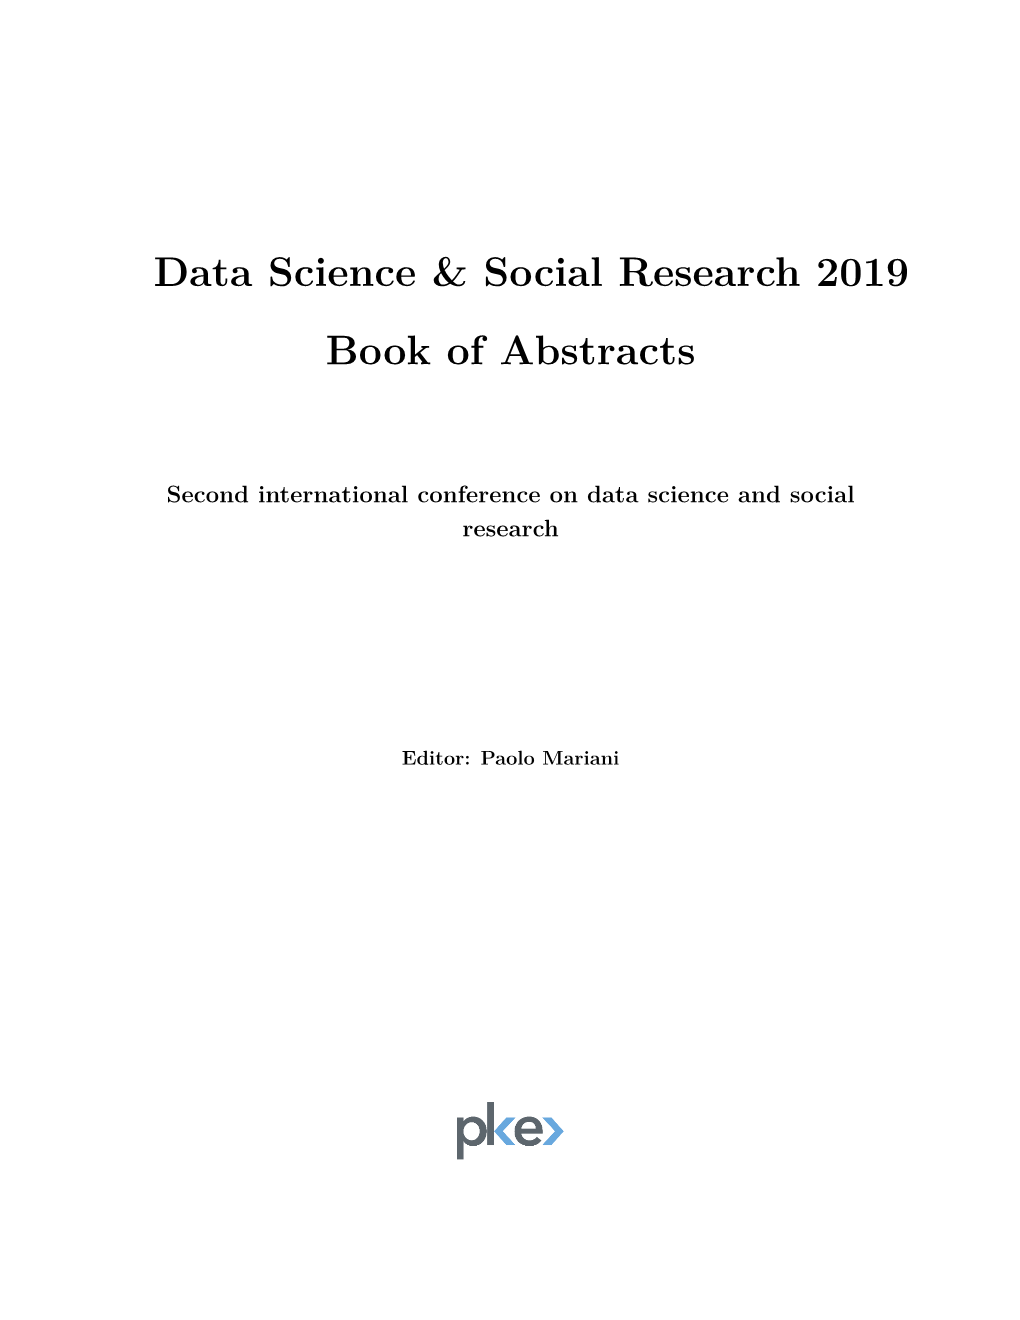 Data Science & Social Research 2019 Book of Abstracts